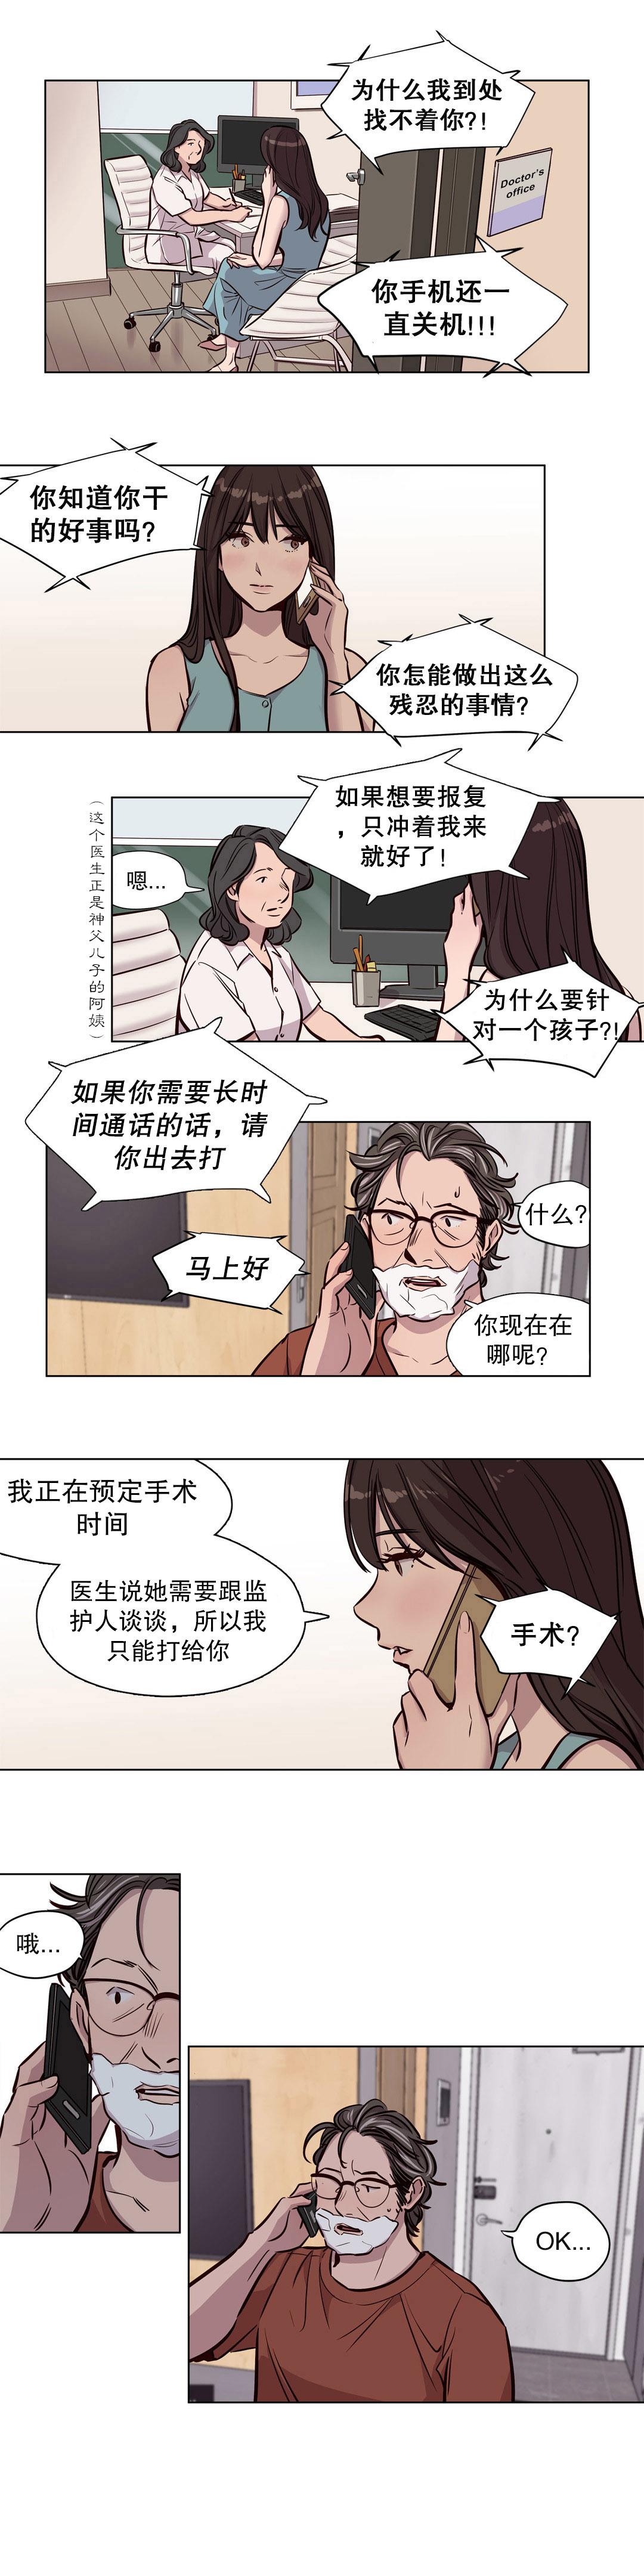 [Ramjak] 赎罪营(Atonement Camp) Ch.50-52 (Chinese) 3